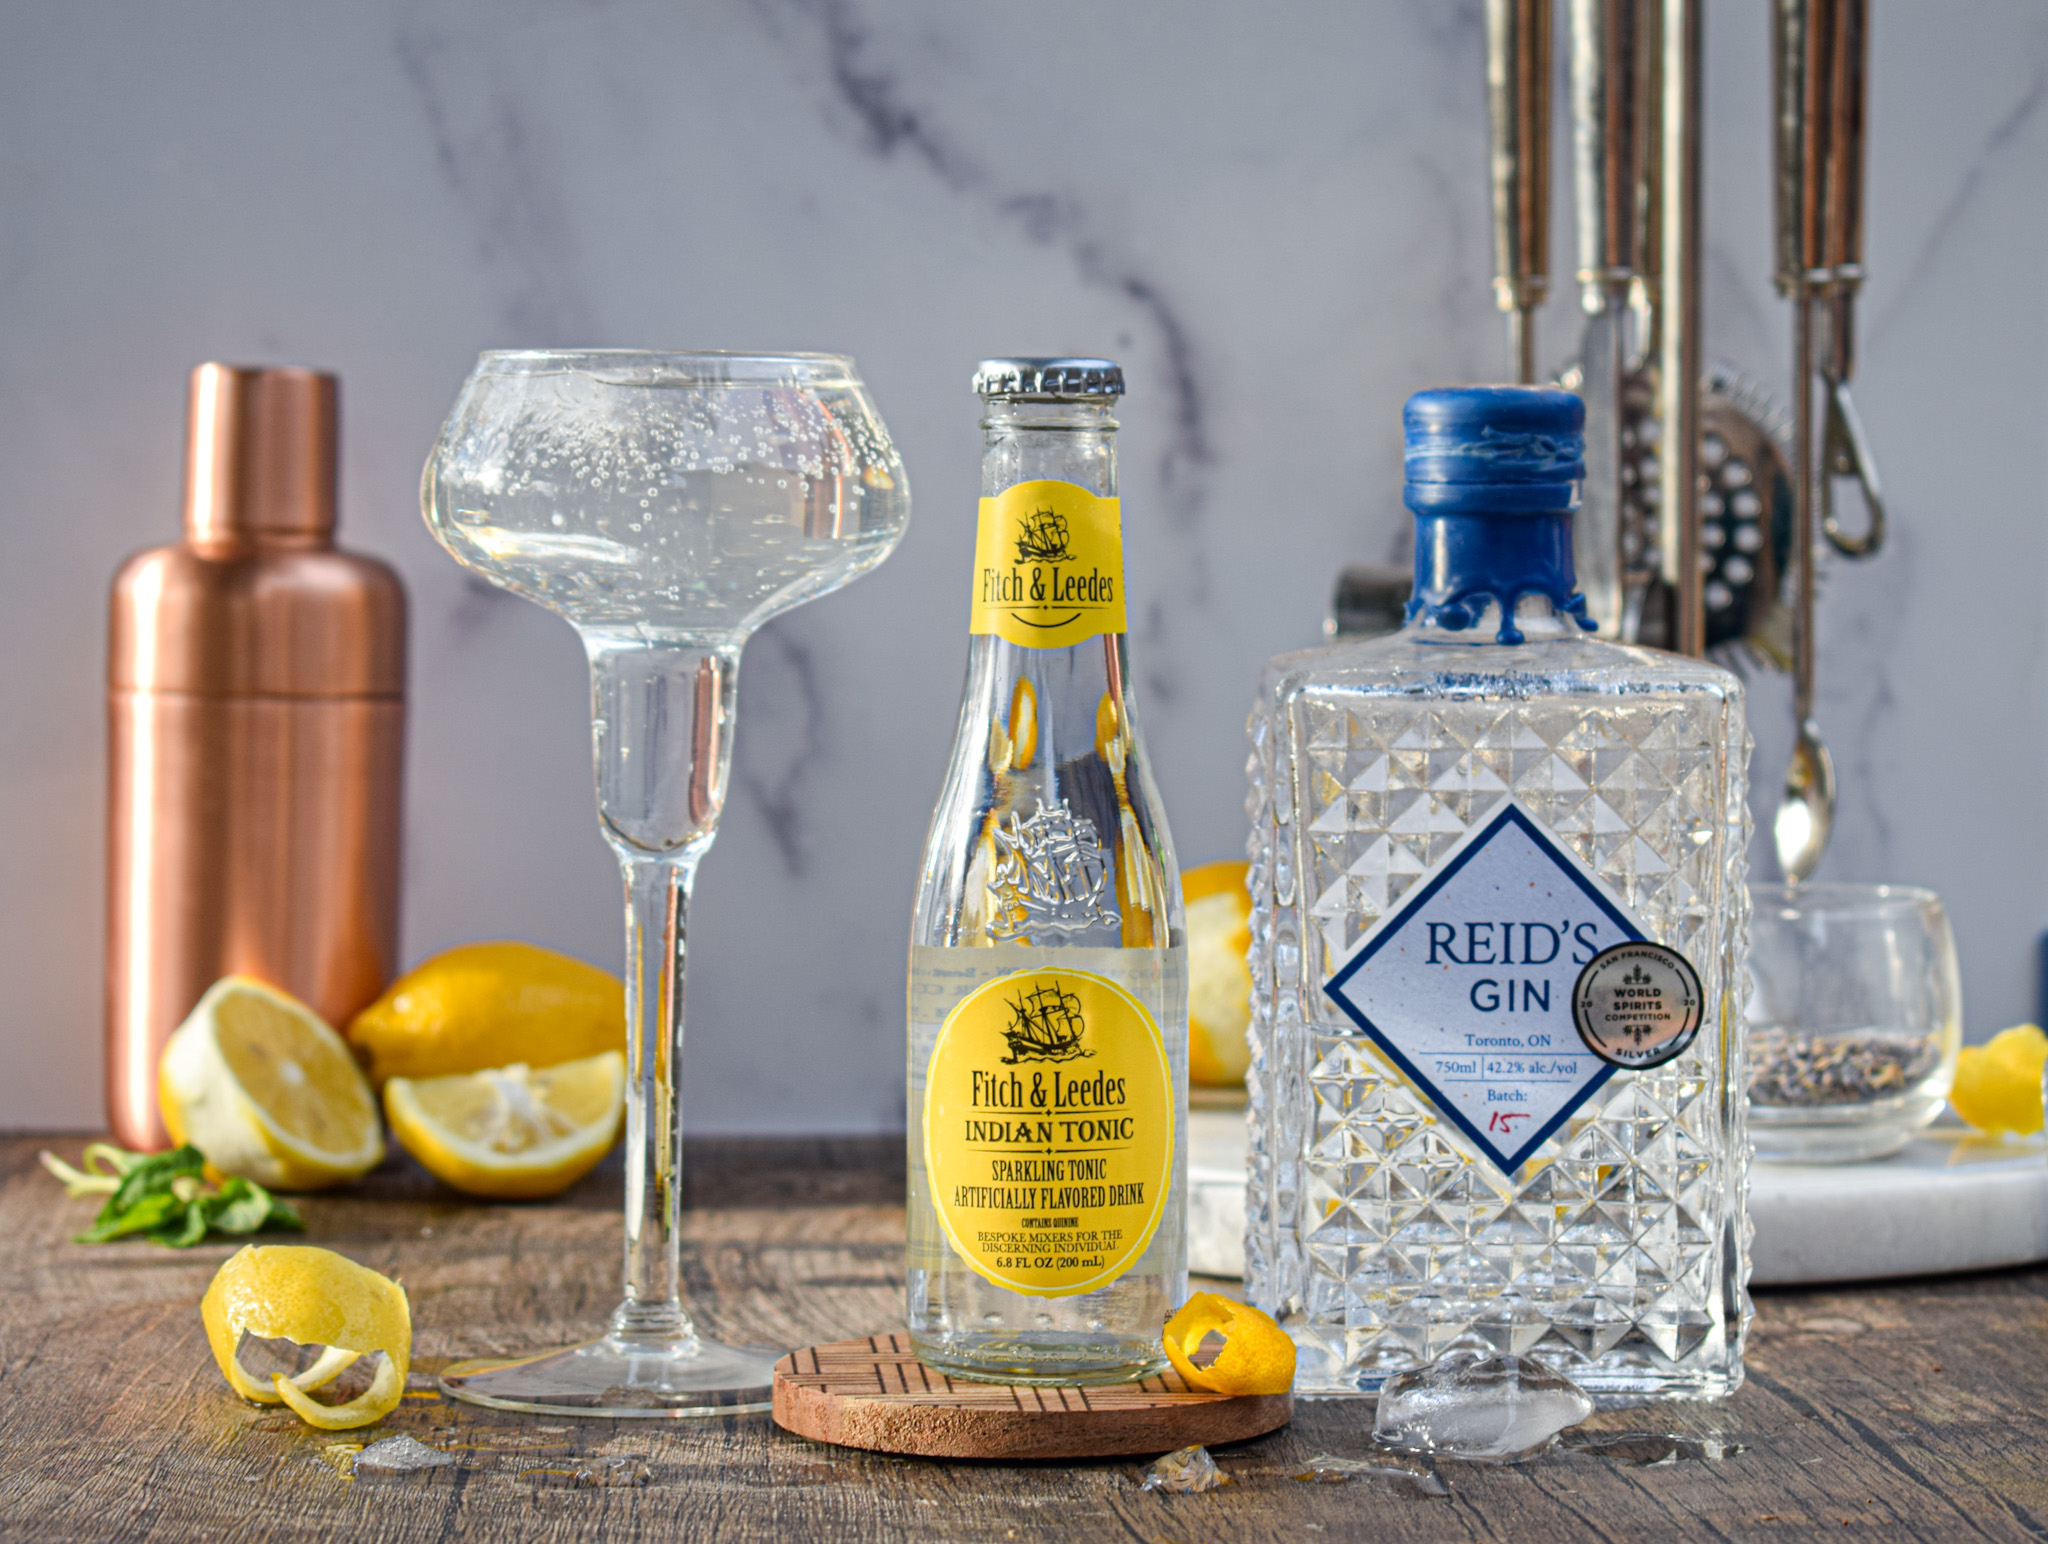 bees knees gin and tonic cocktail recipe with honey lemon and lavender